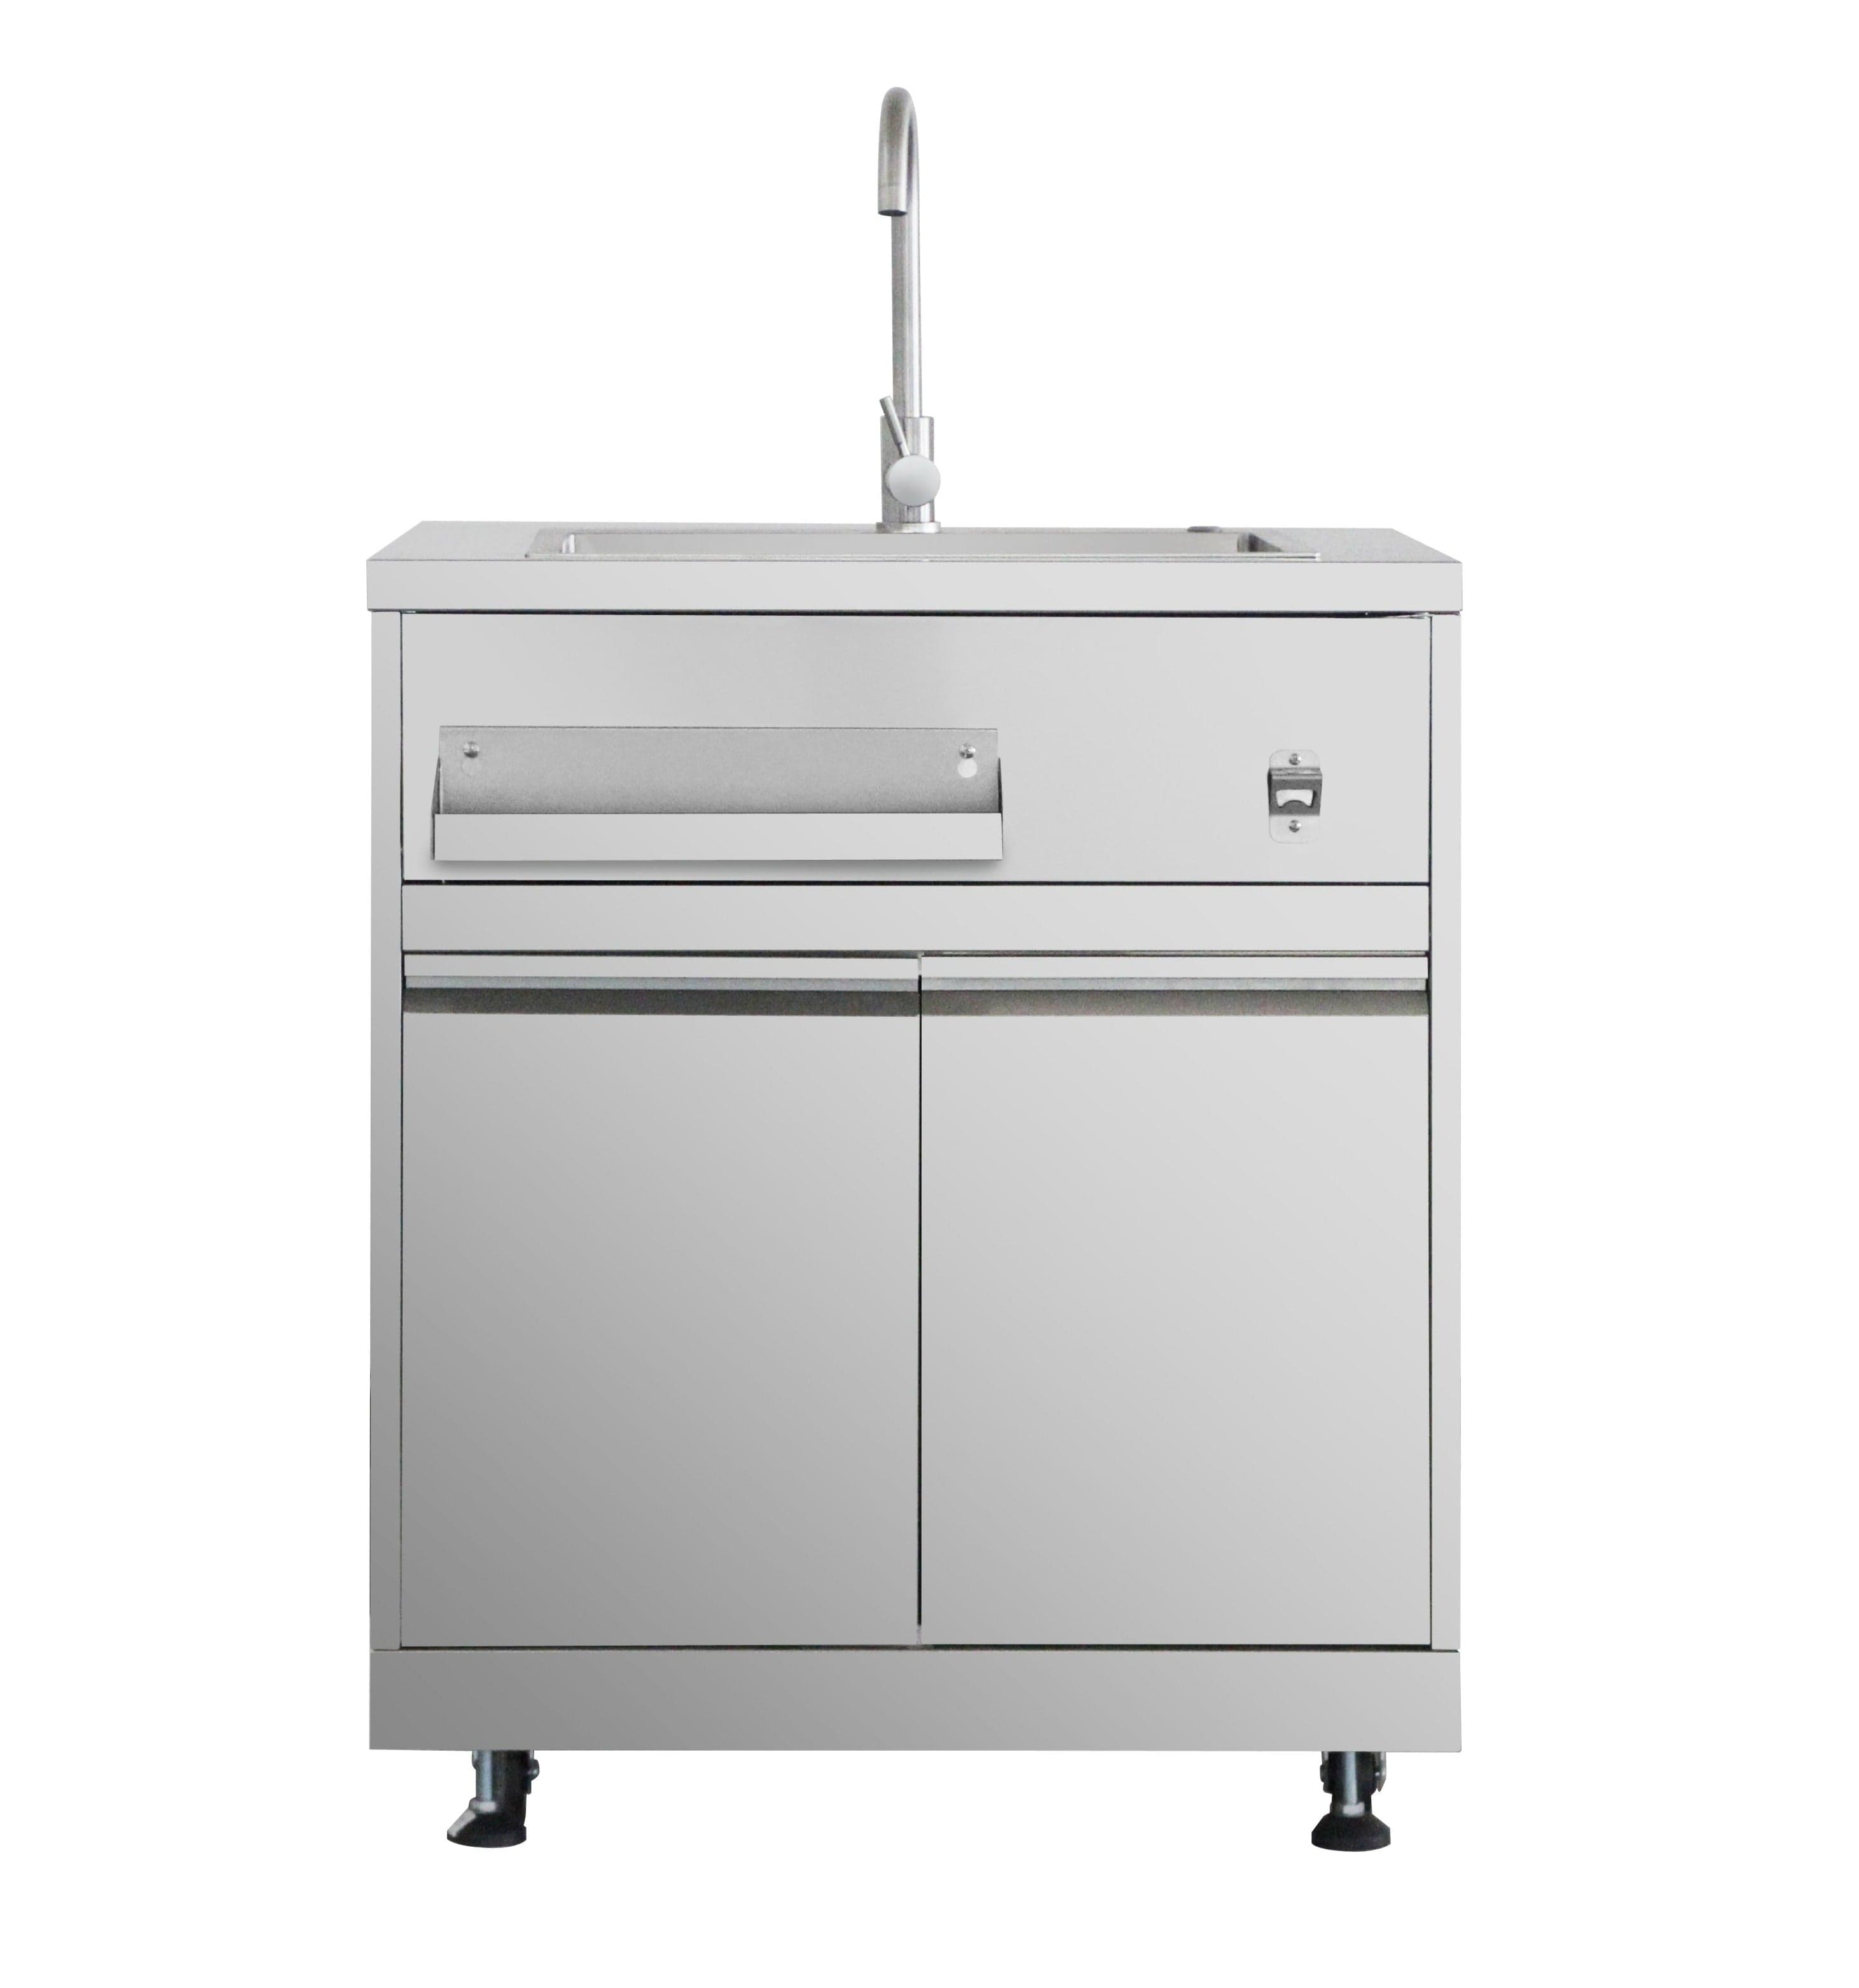 Thor Outdoor Kitchen Package with Propane Gas Grill and Freezer, AP-Outdoor-LP-F-6-A Outdoor Grill Package AP-Outdoor-LP-F-6-A Luxury Appliances Direct